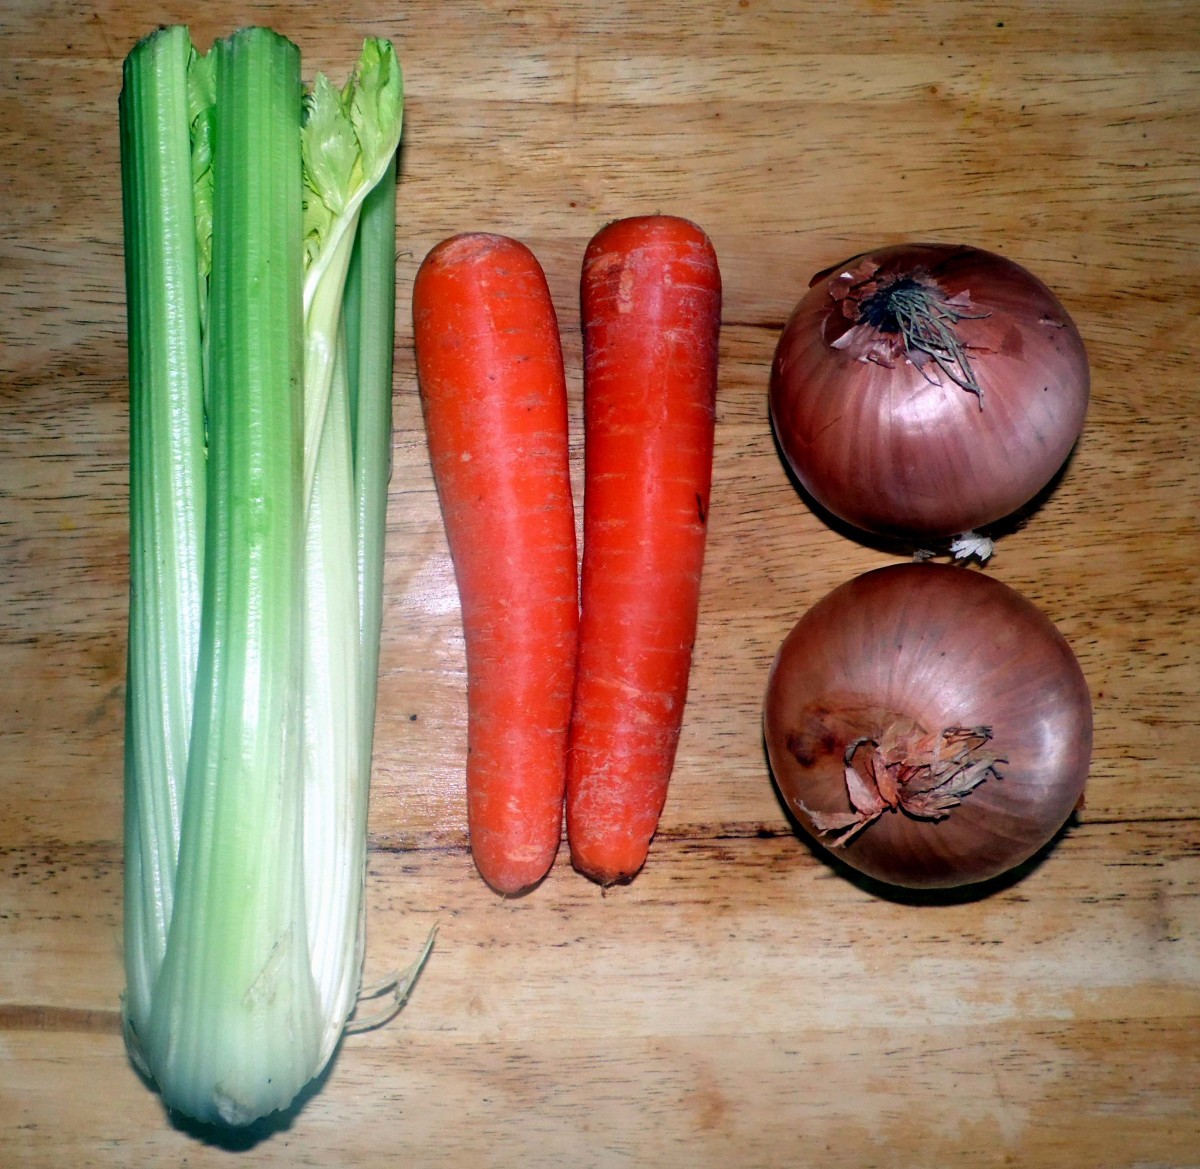 The mirepoix triumvirate (good name for a band)